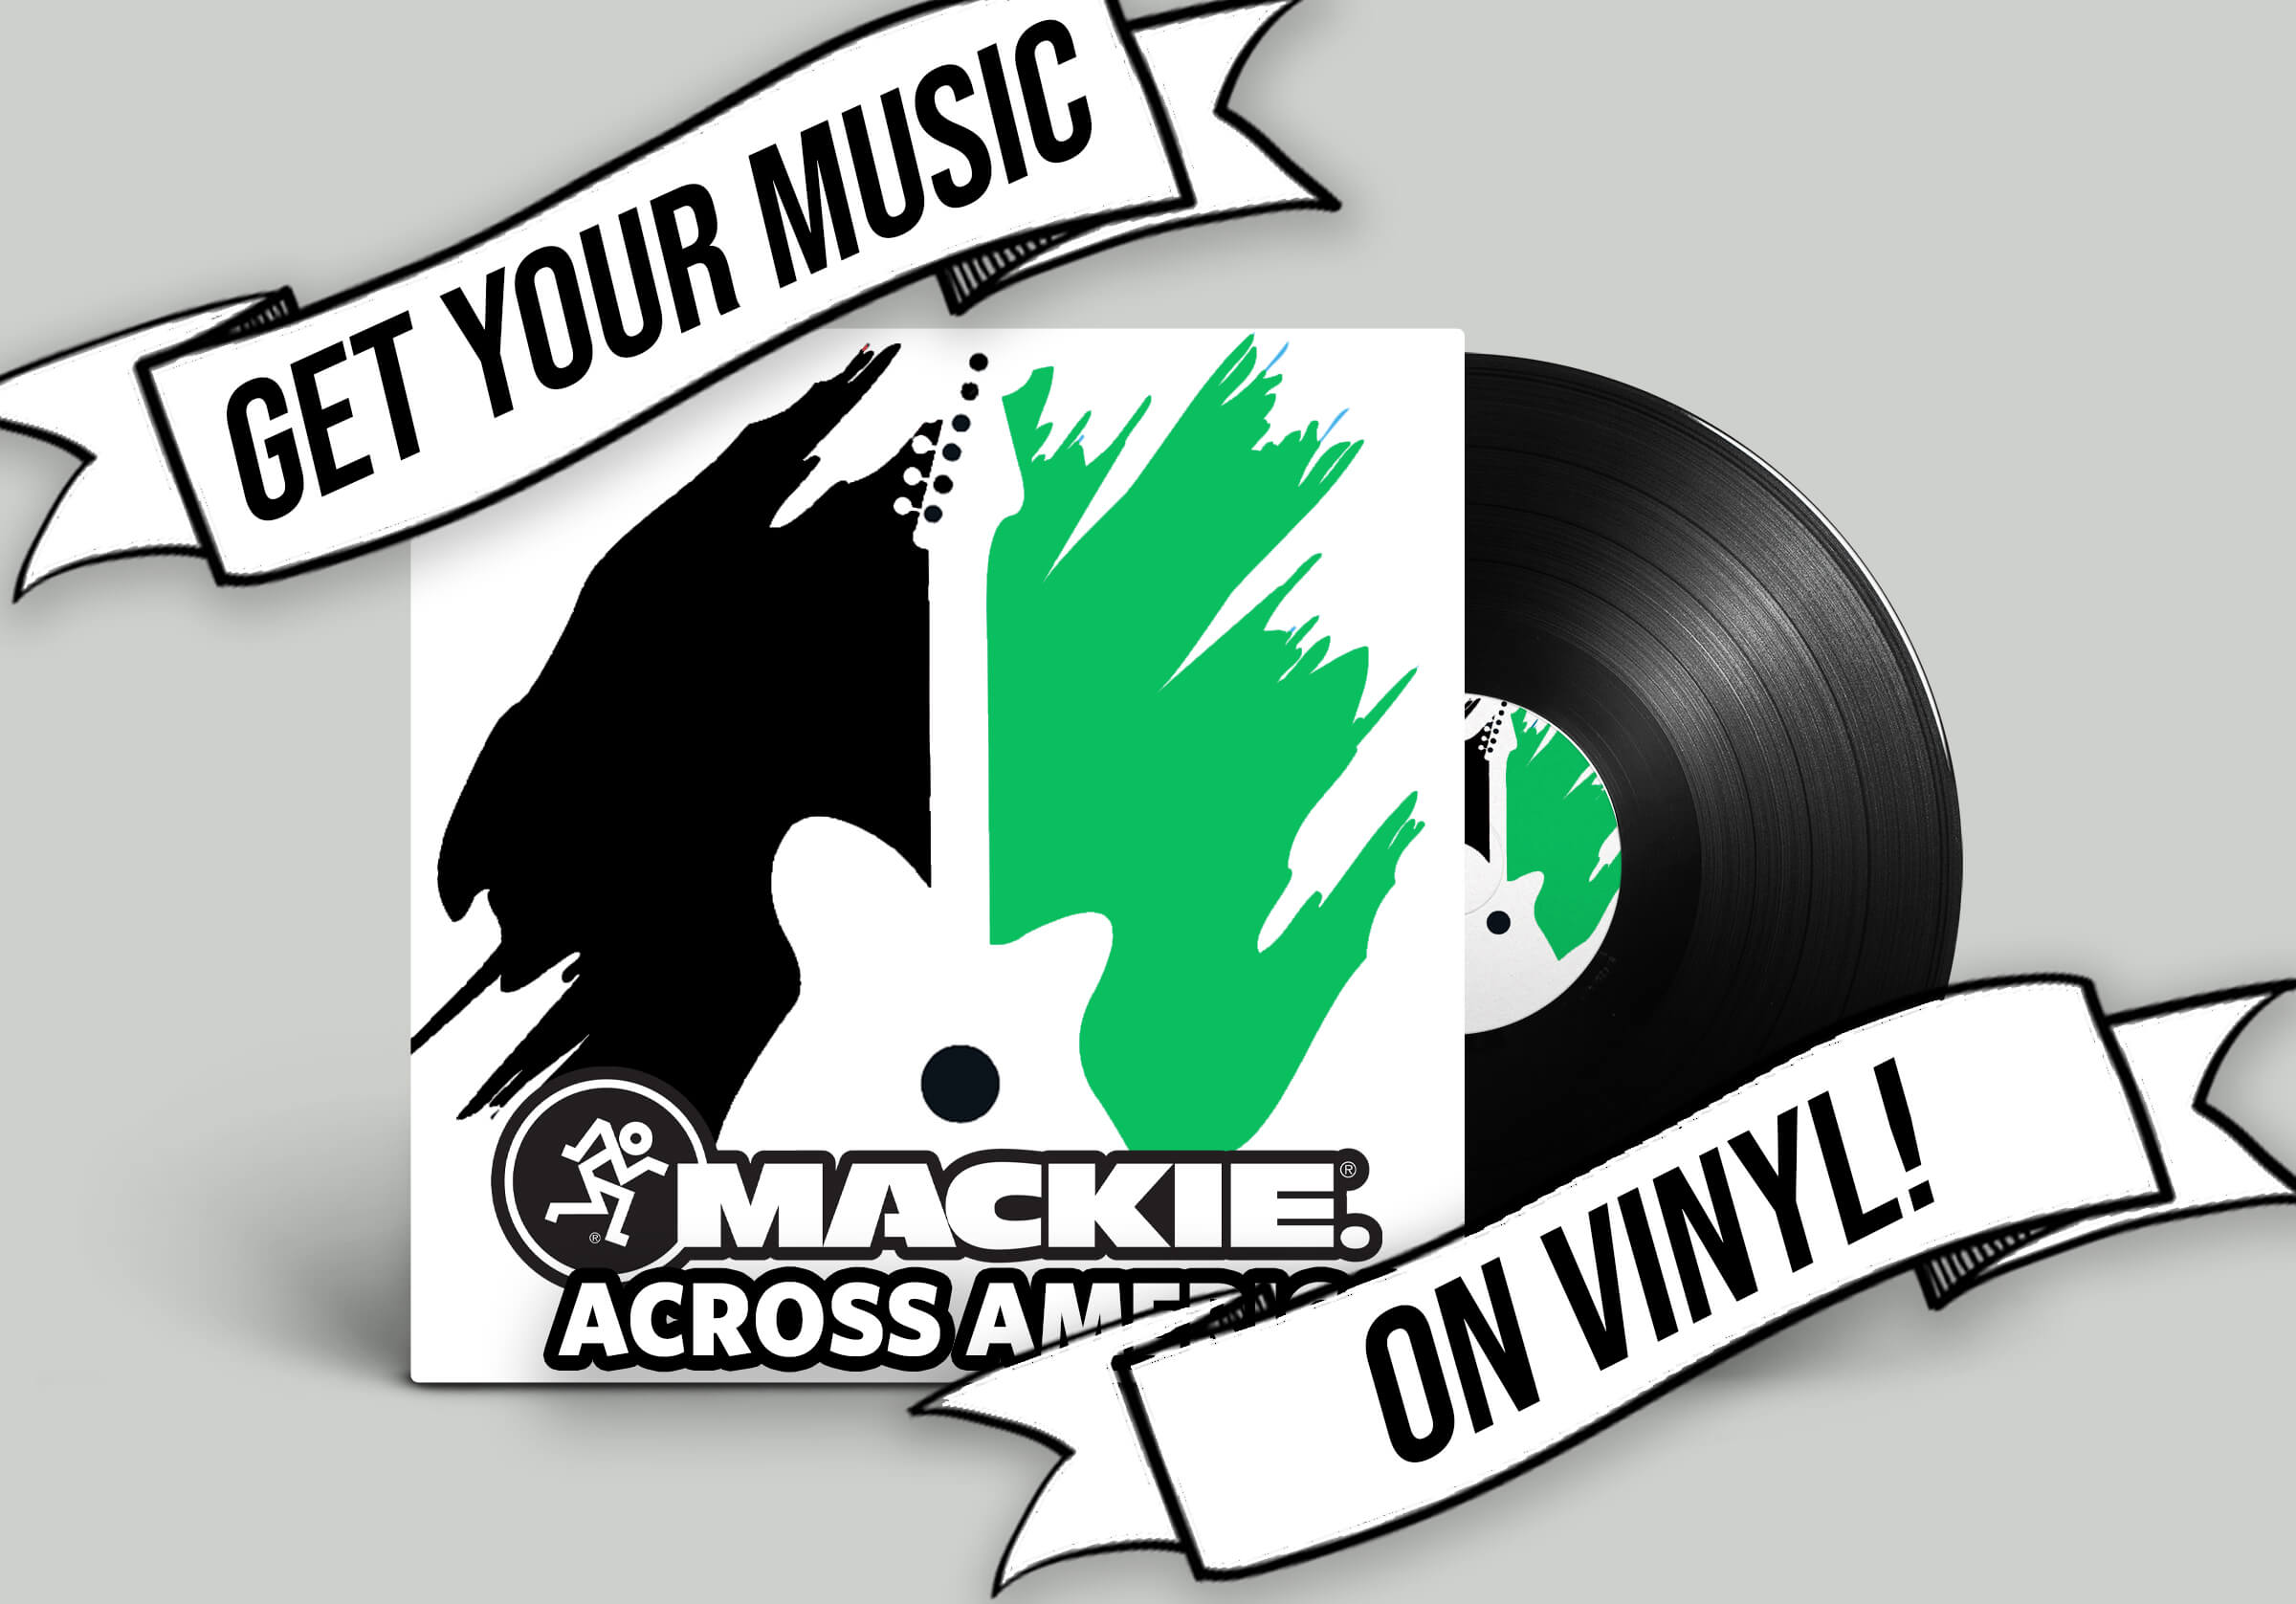 Win Mackie Gear PLUS Get Featured on Vinyl [Round 2 Submissions Now Open]